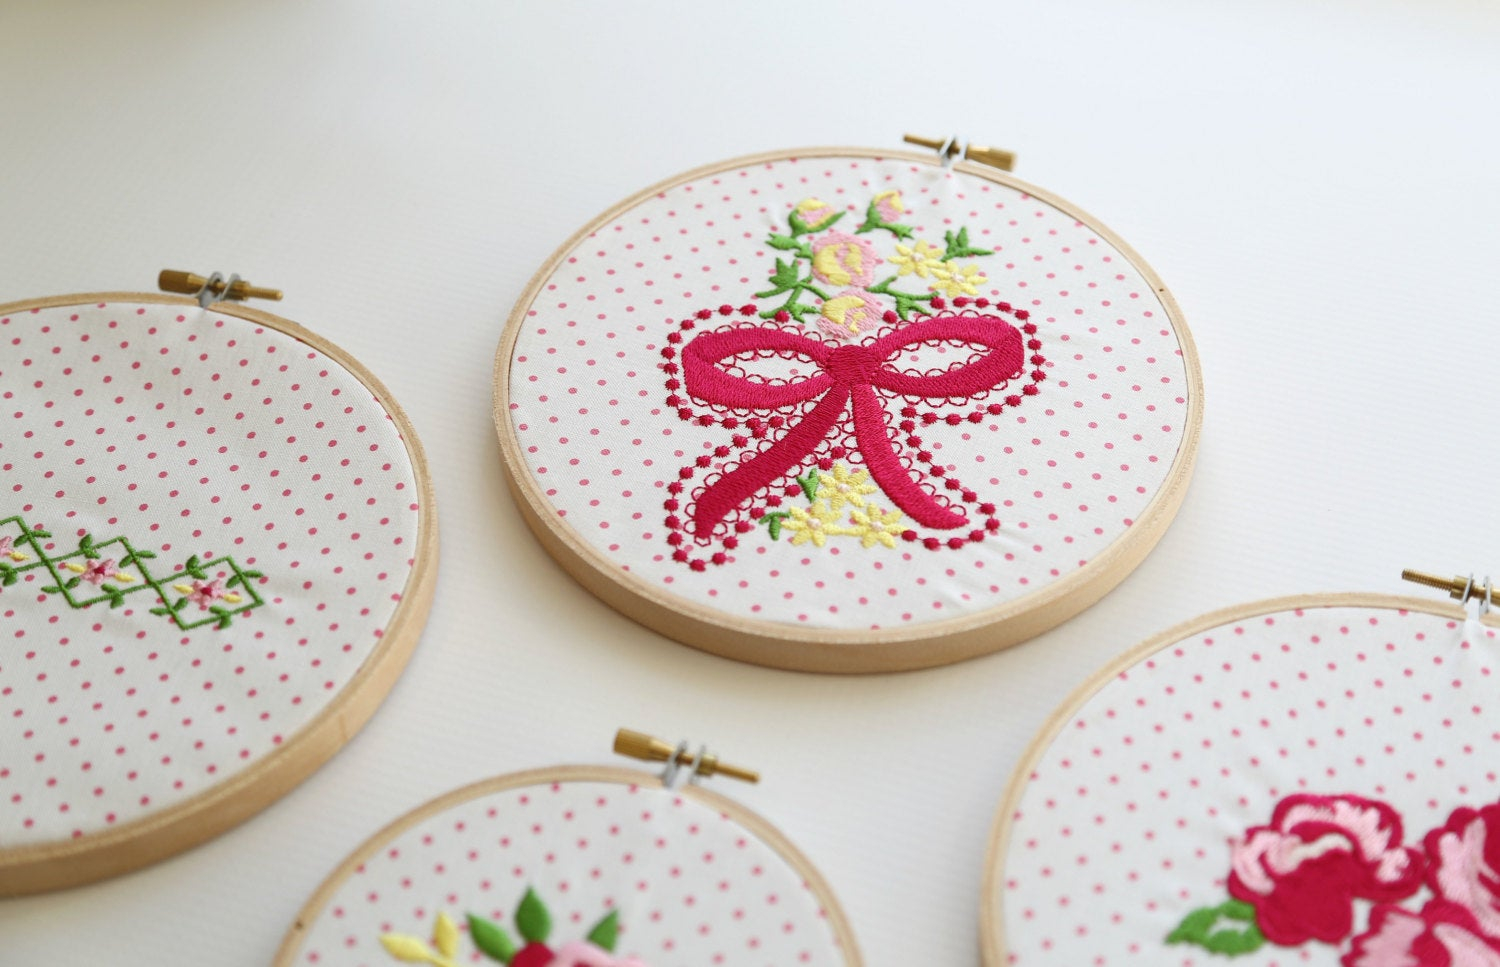 Machine Embroidery Patterns Dainty Darling Machine Embroidery Designs From The Cottage Mama